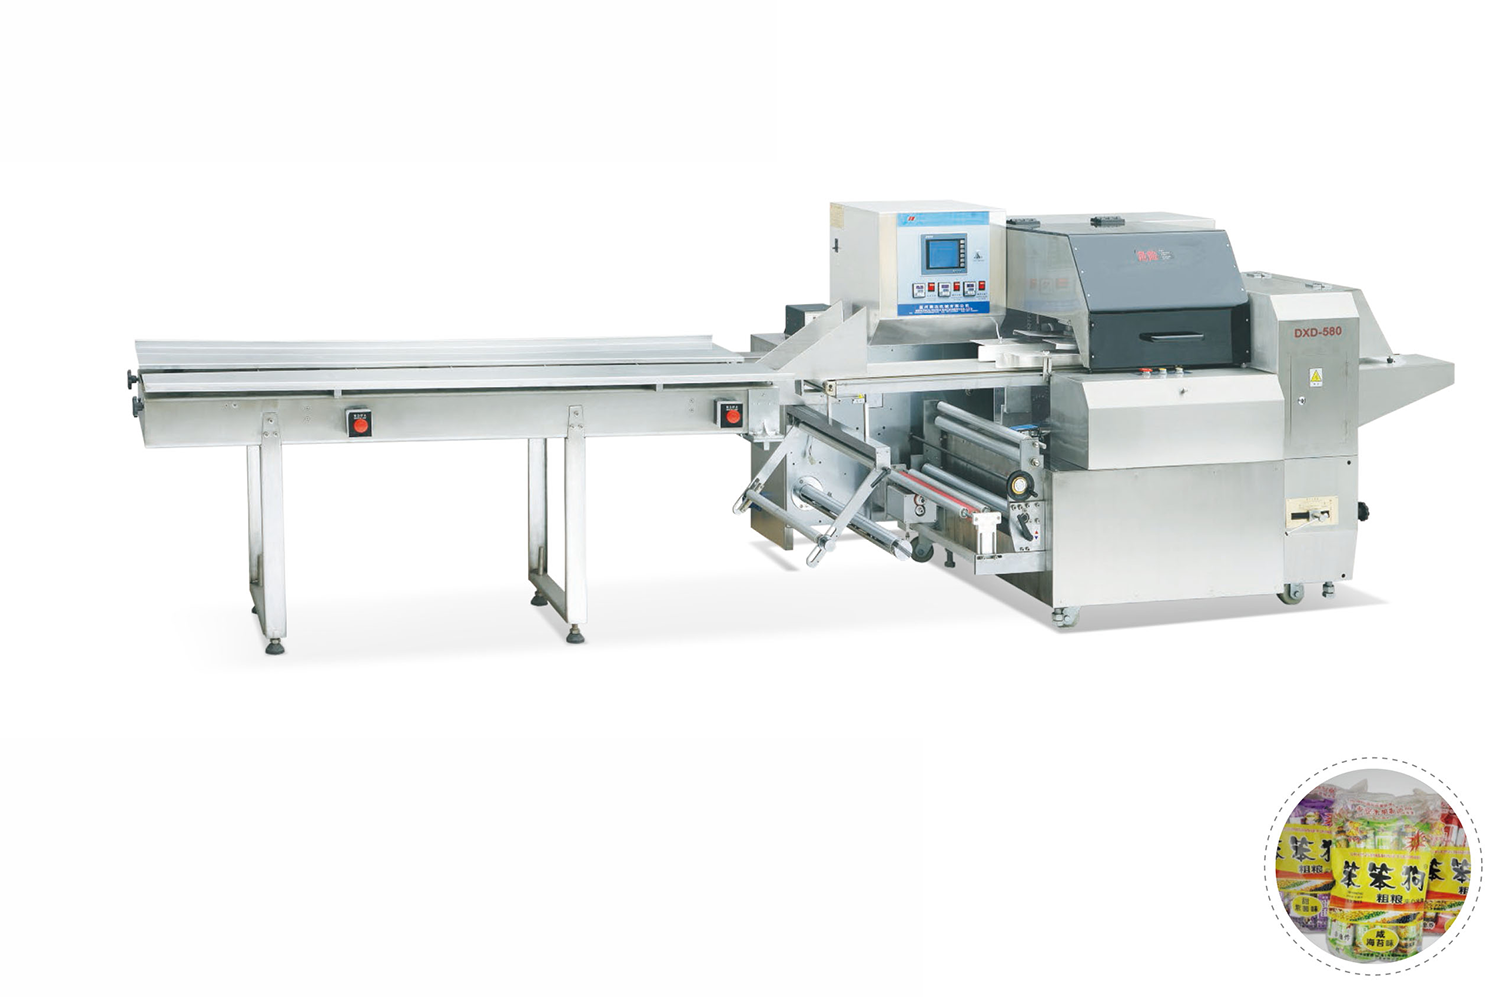 DXD-580 Multi-function Pillow Type Packaging Machine